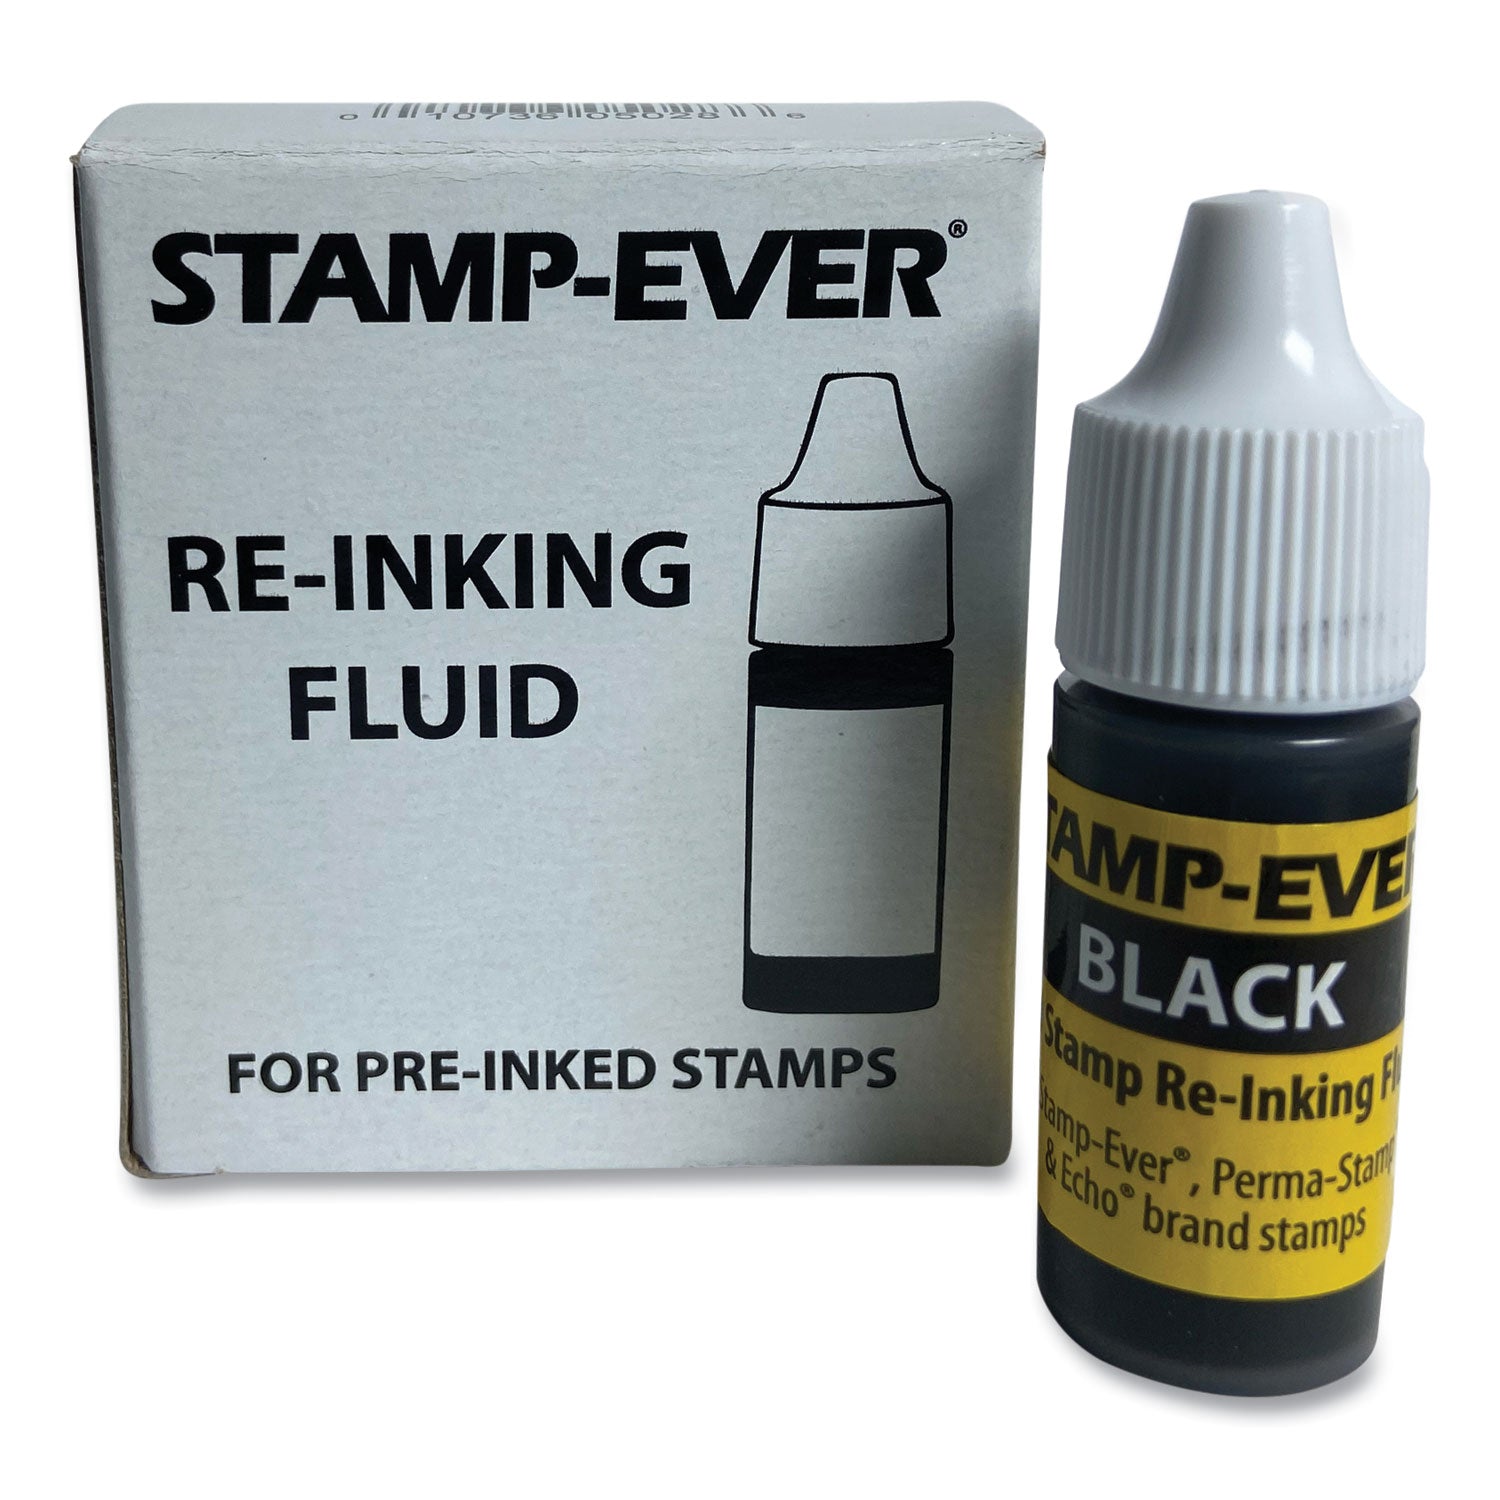 Refill Ink for Clik! and Universal Stamps, 7 mL Bottle, Black - 